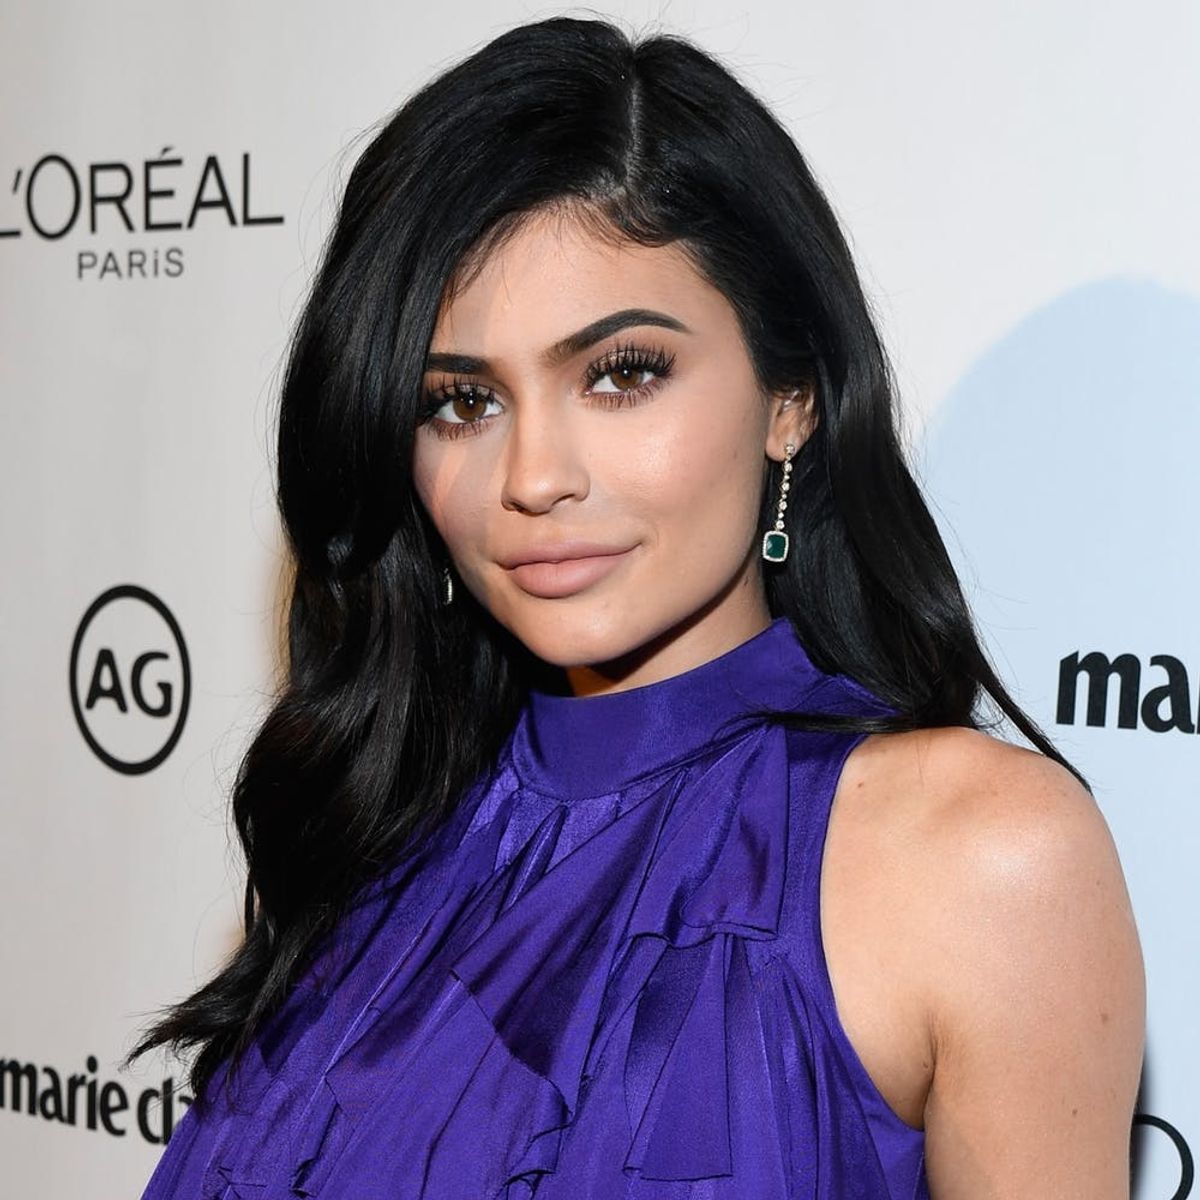 Kylie Jenner Opens Up About Pregnancy and Her First Month With Daughter Stormi